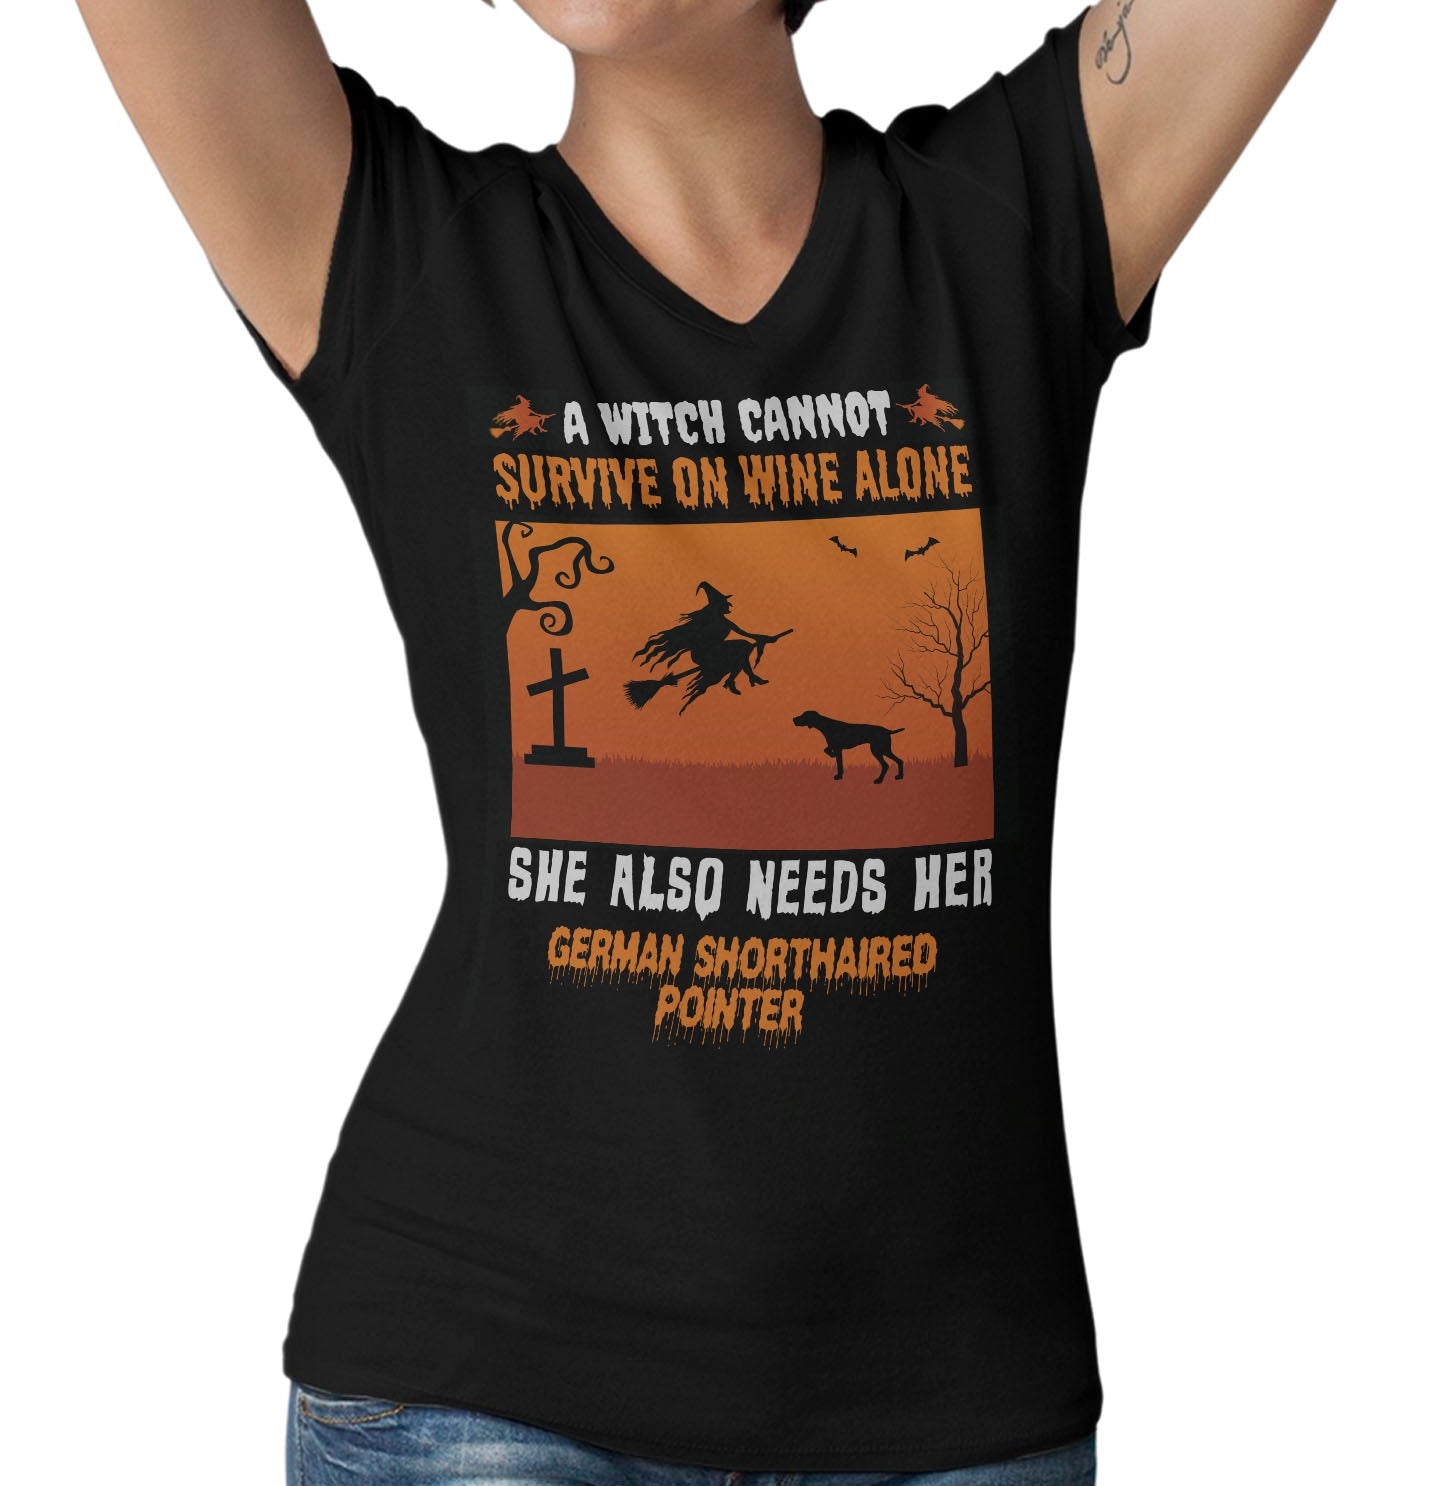 A Witch Needs Her German Shorthaired Pointer - Women's V-Neck T-Shirt